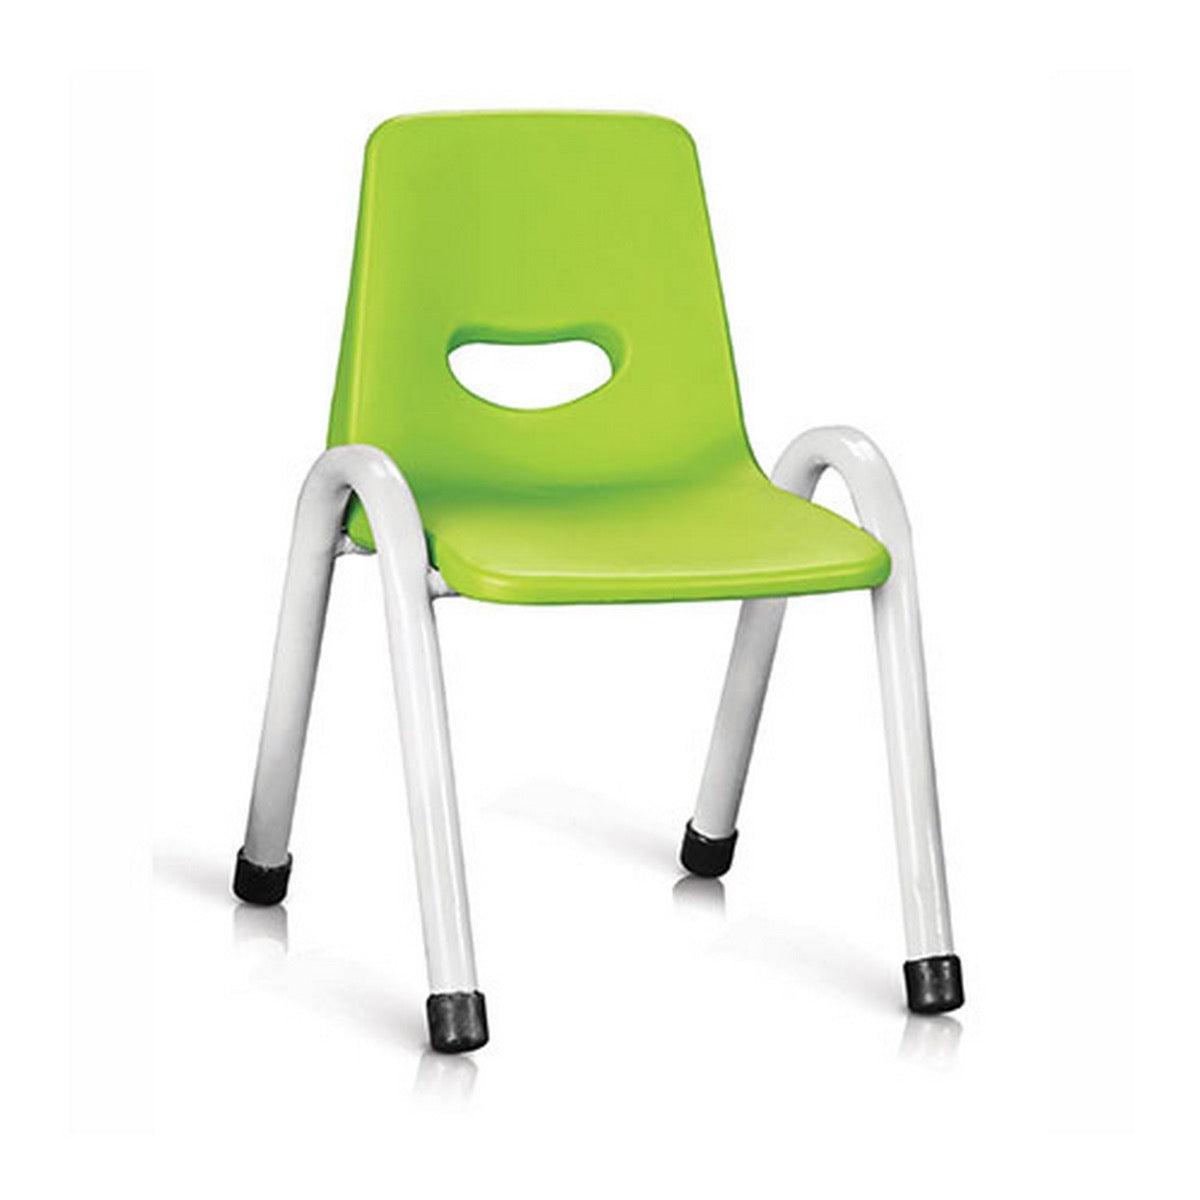 Ok Play Cute Chair Medium, Study Chair, Perfect For Home, Creches And School, Parrot Green & Ivory White, 5 to 10 Years